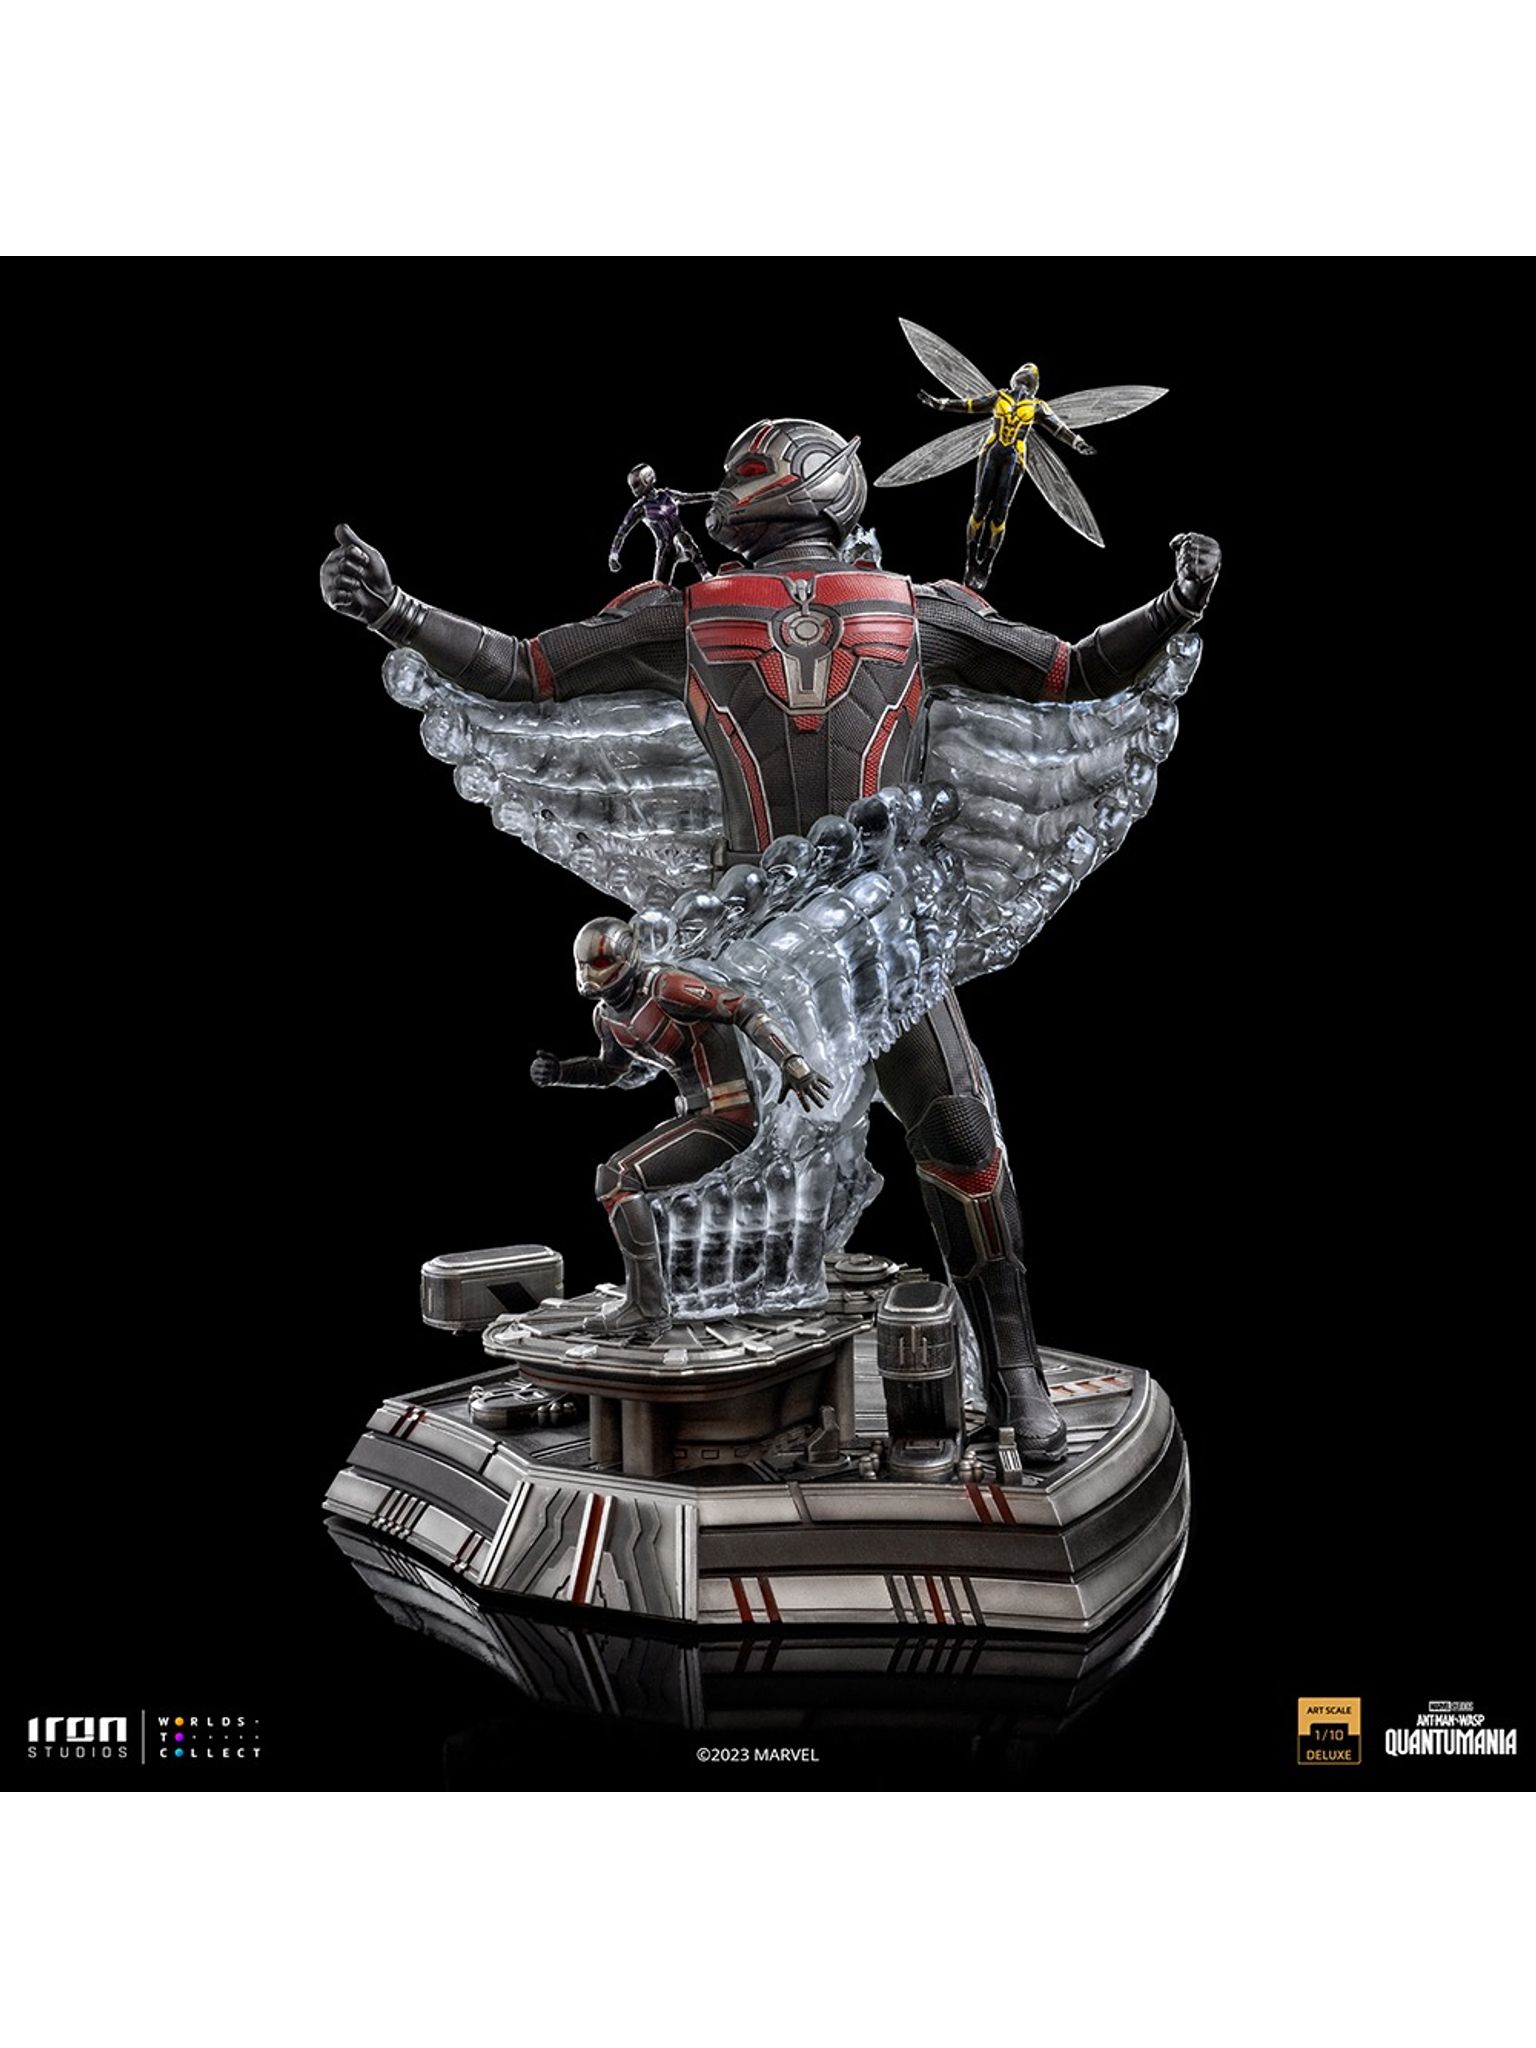 IRON STUDIOS : Ant-Man and the Wasp Quantumania - Statue Ant-Man and the Wasp - Art Scale 1/10 207880-1536-2048?v=638170908156500000&width=1536&height=2048&aspect=true